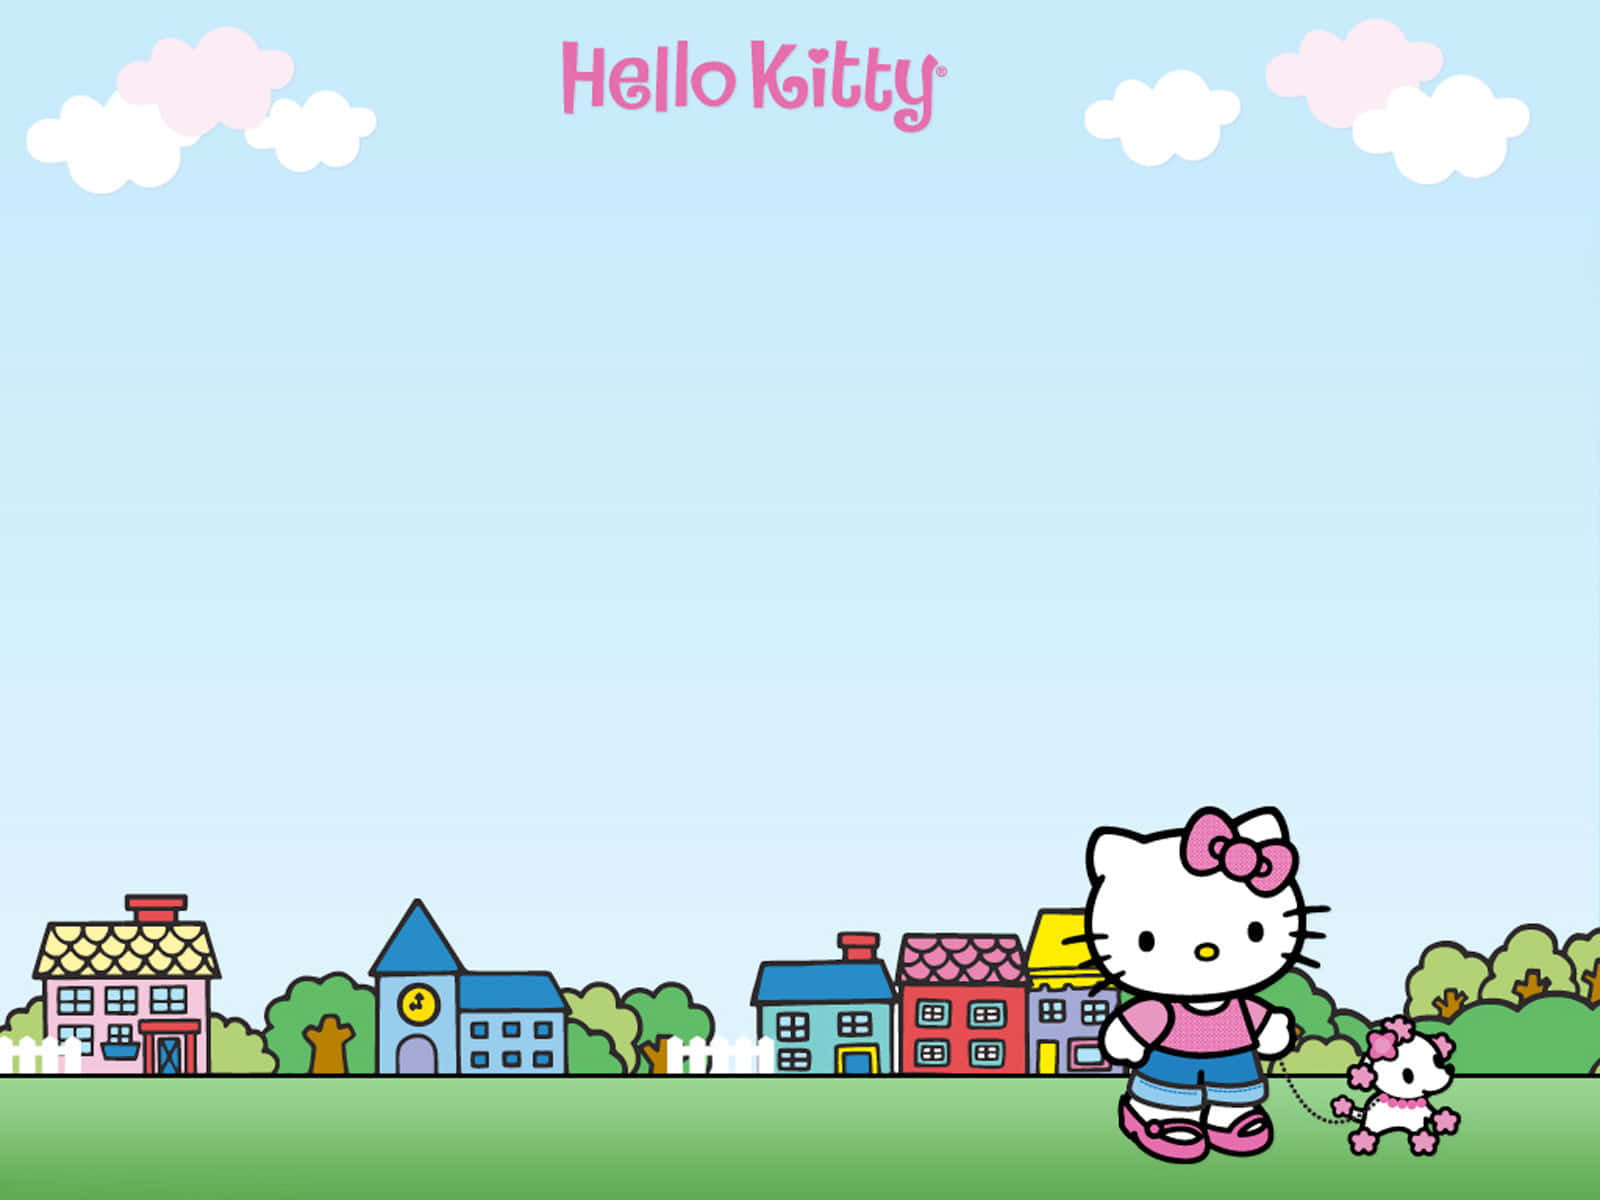 100+] Hello Kitty Aesthetic Background s for FREE 